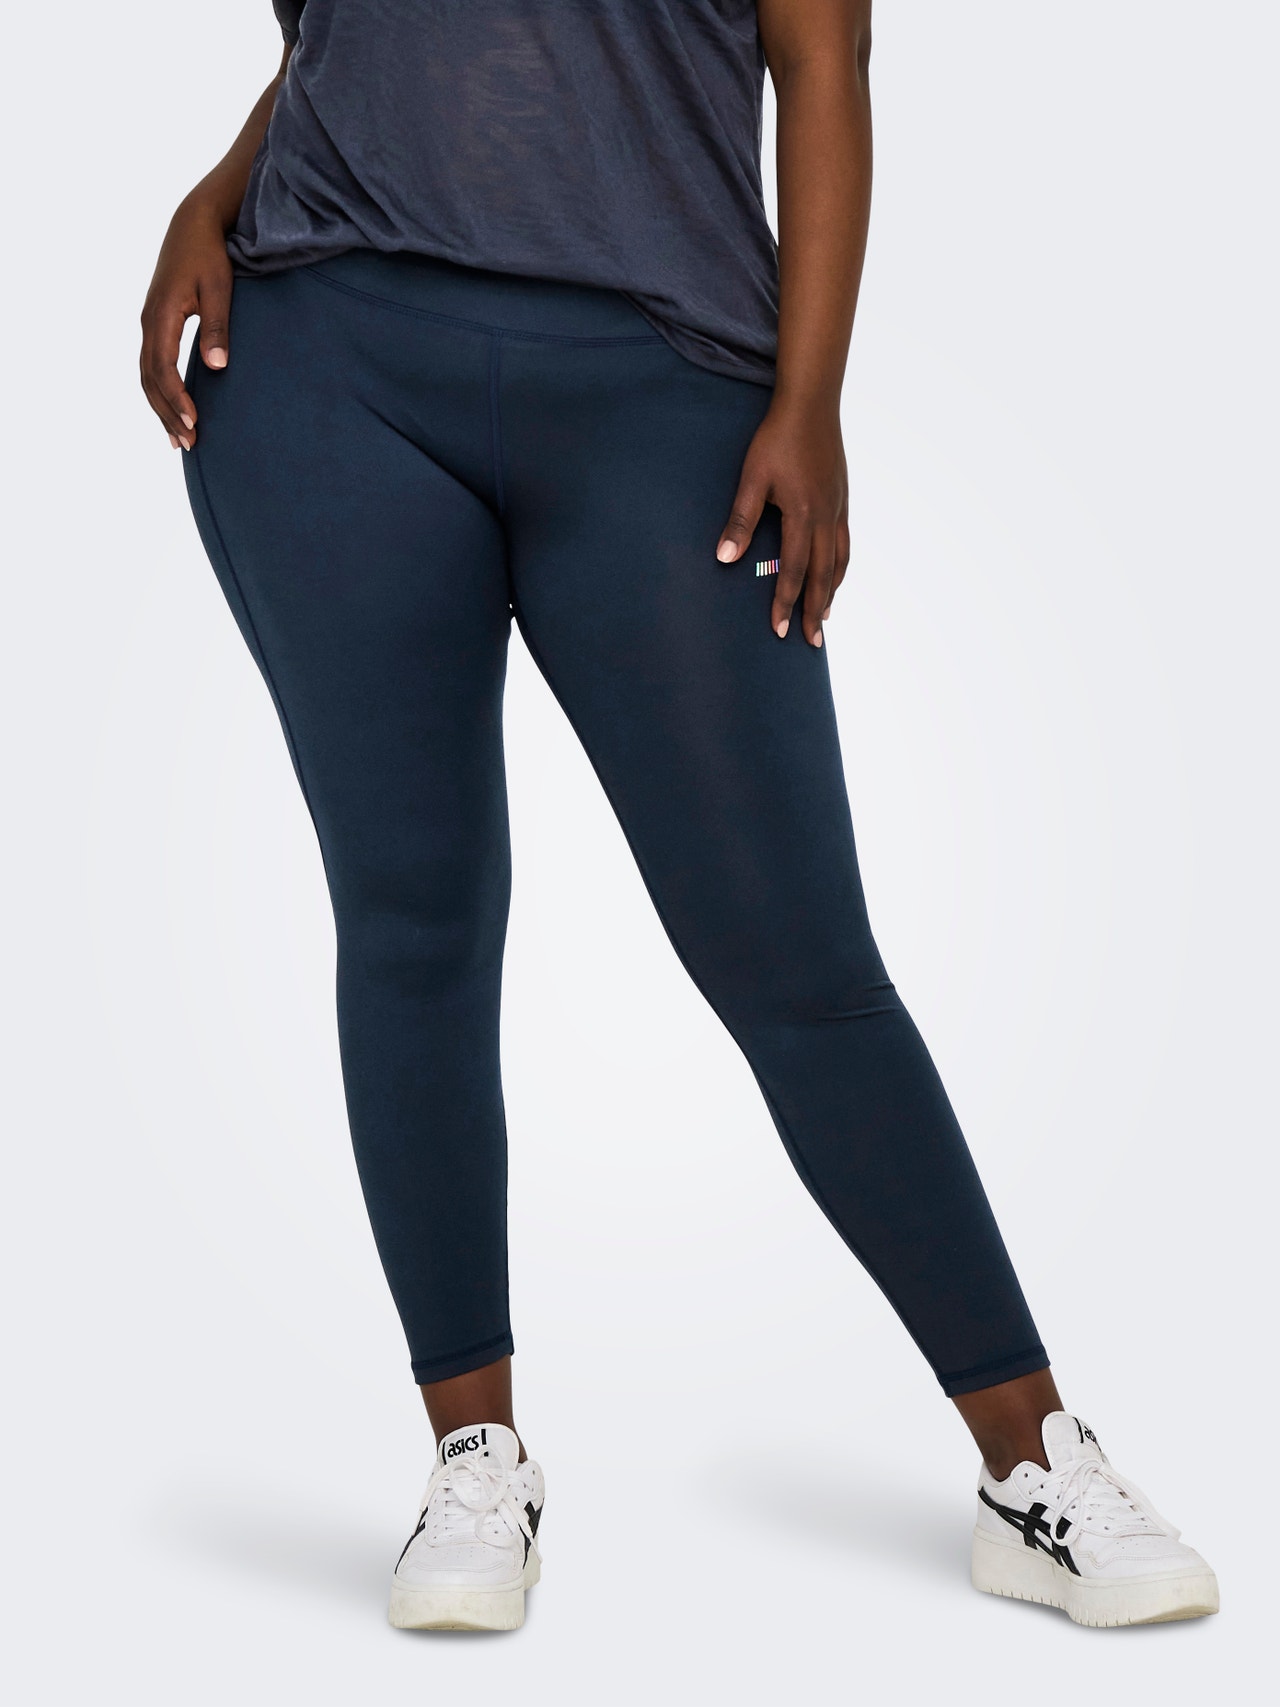 https://images.only.com/15289043/4177638/003/only-curvysporttightswithhighwaist-blue.jpg?v=310f2213c709bf4faaa19bbe4b0834e3&format=webp&width=1280&quality=90&key=25-0-3